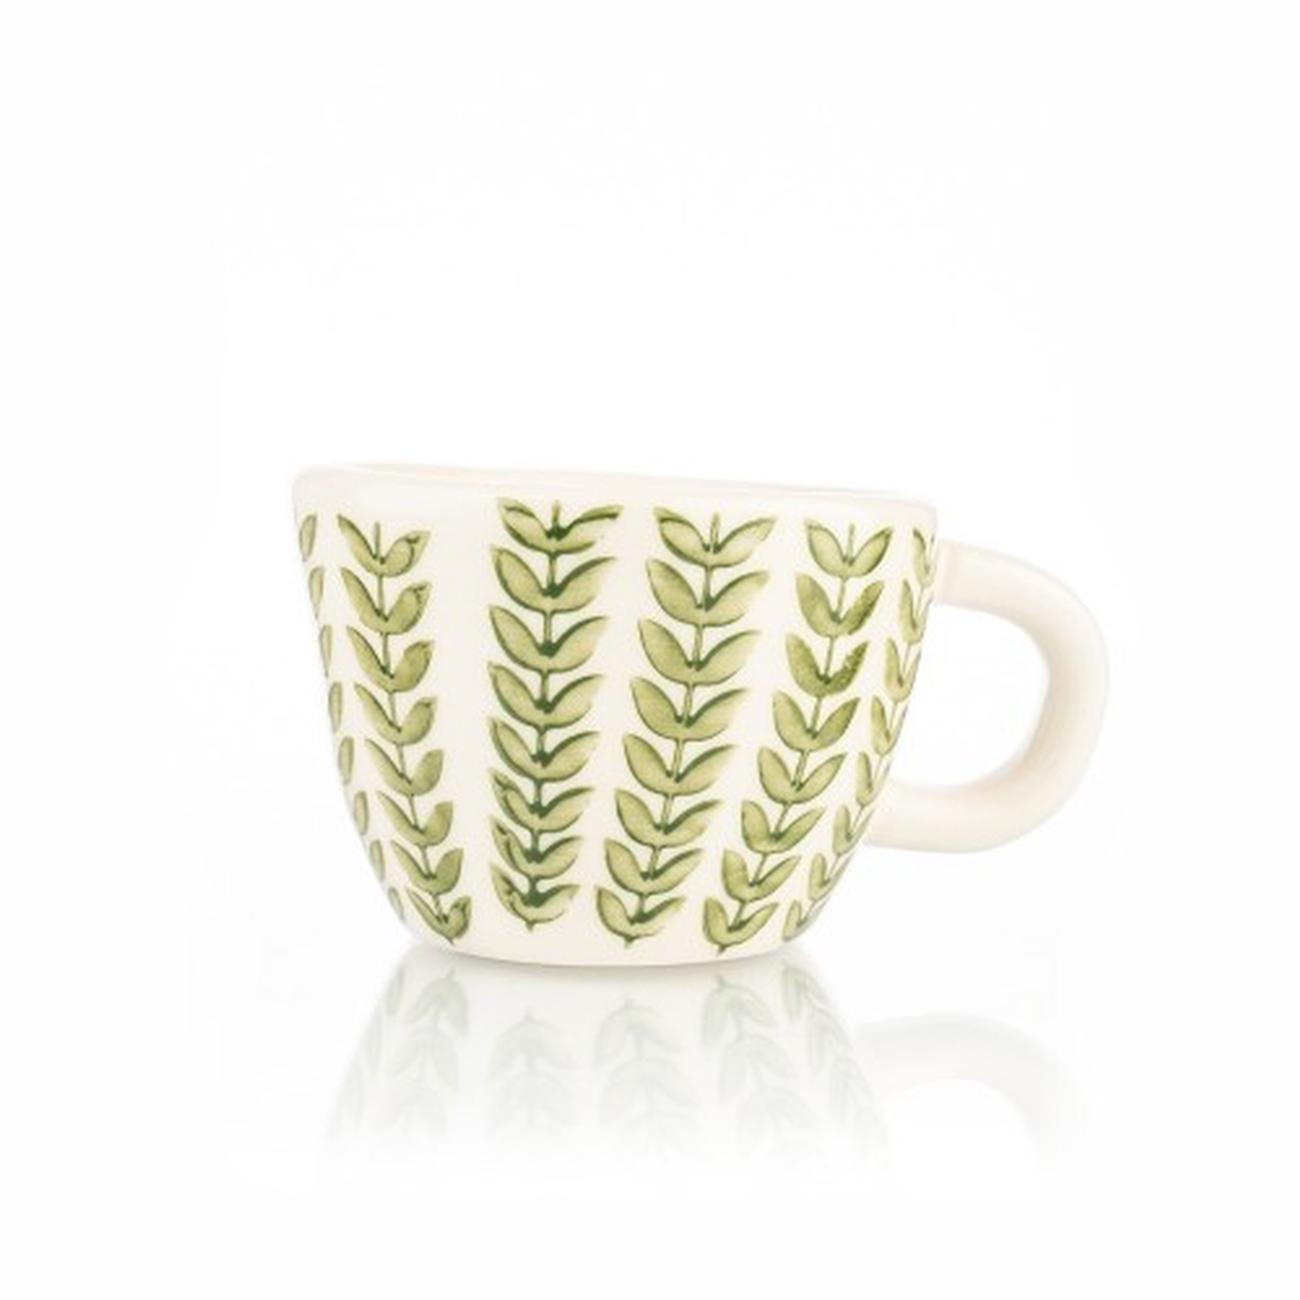 Siip-Espresso-Cup-Vertical-Floral-Green - Siip Espresso Cup-Vertical Floral Green